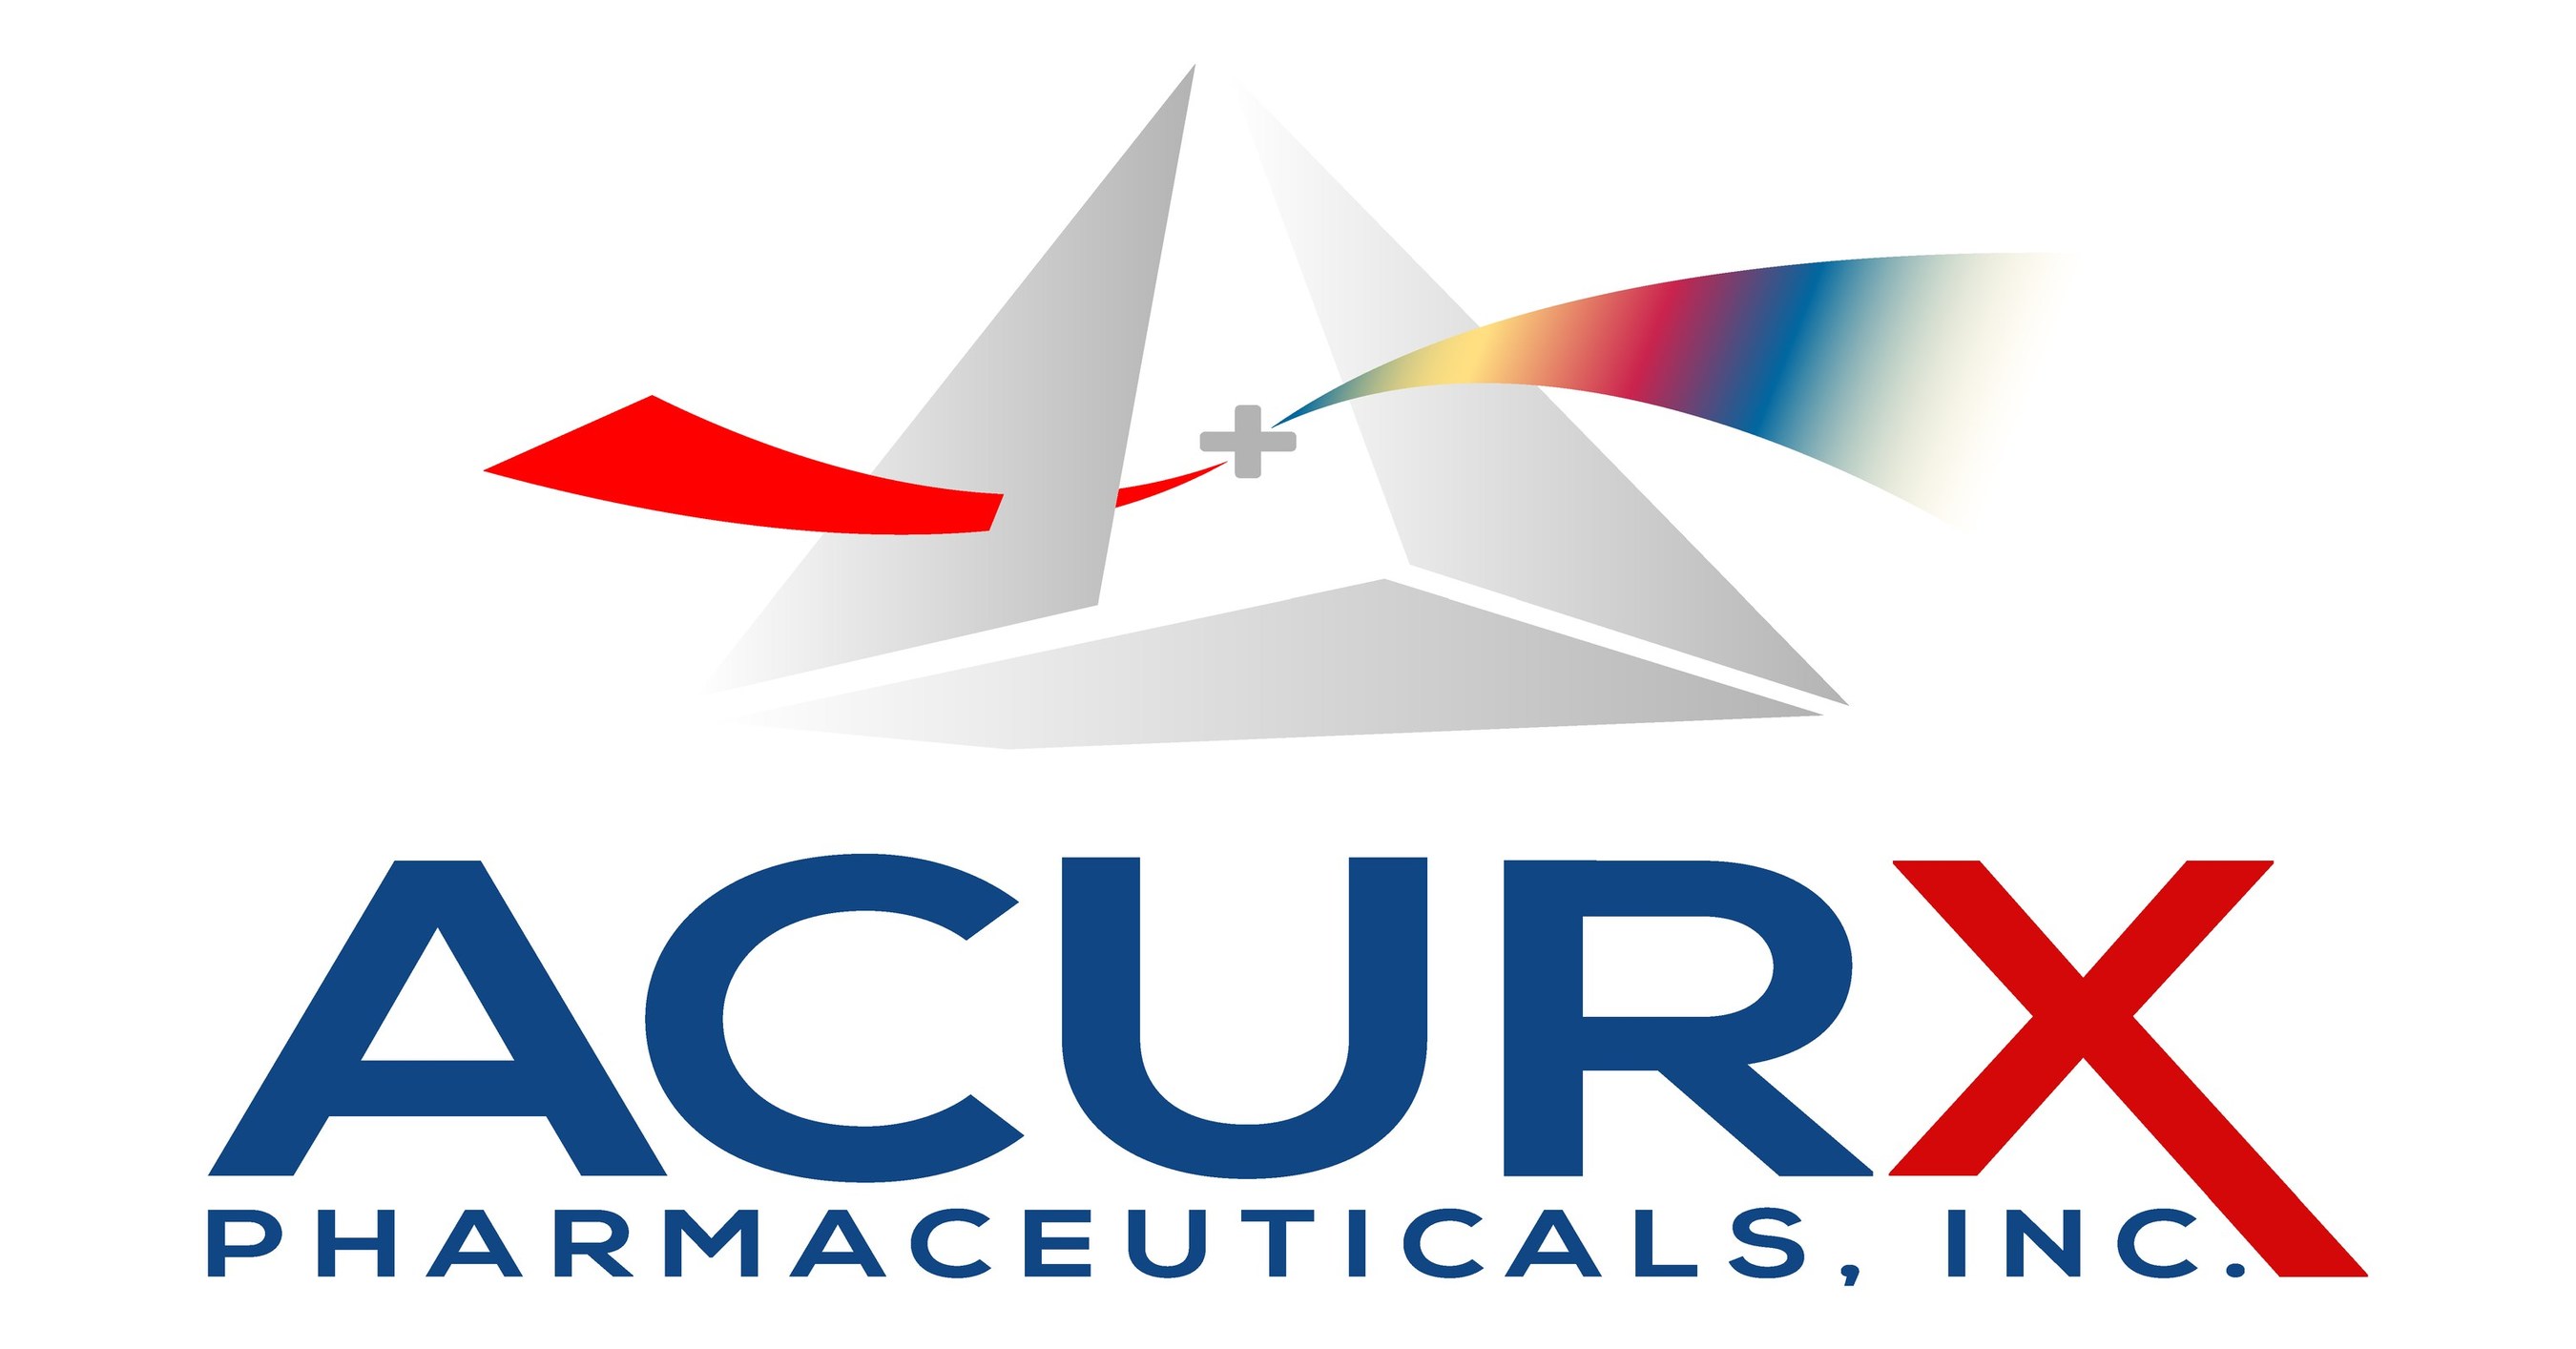 Acurx Pharmaceuticals Share Price And Volume Are Surging Ahead Of Phase 2b Trial Data Release ($ACXP)